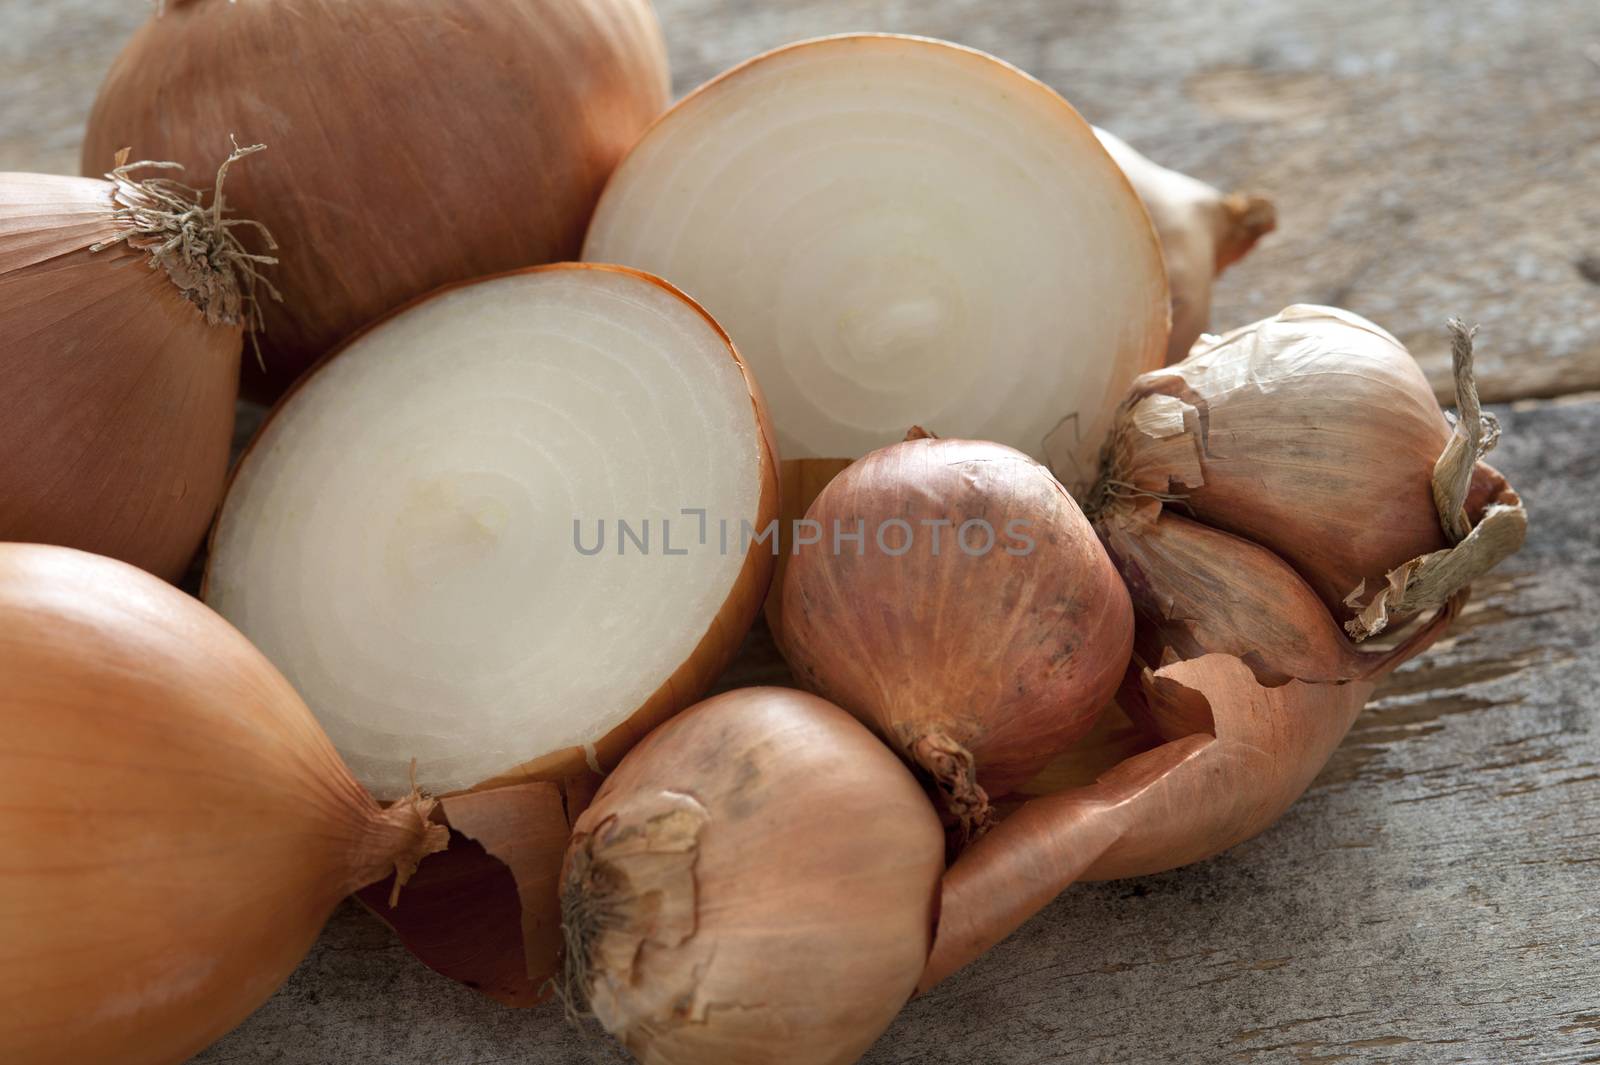 Pile of fresh whole and halved brown onions on a kitchen counter for use as a cooking ingredient or accompaniment to a meal